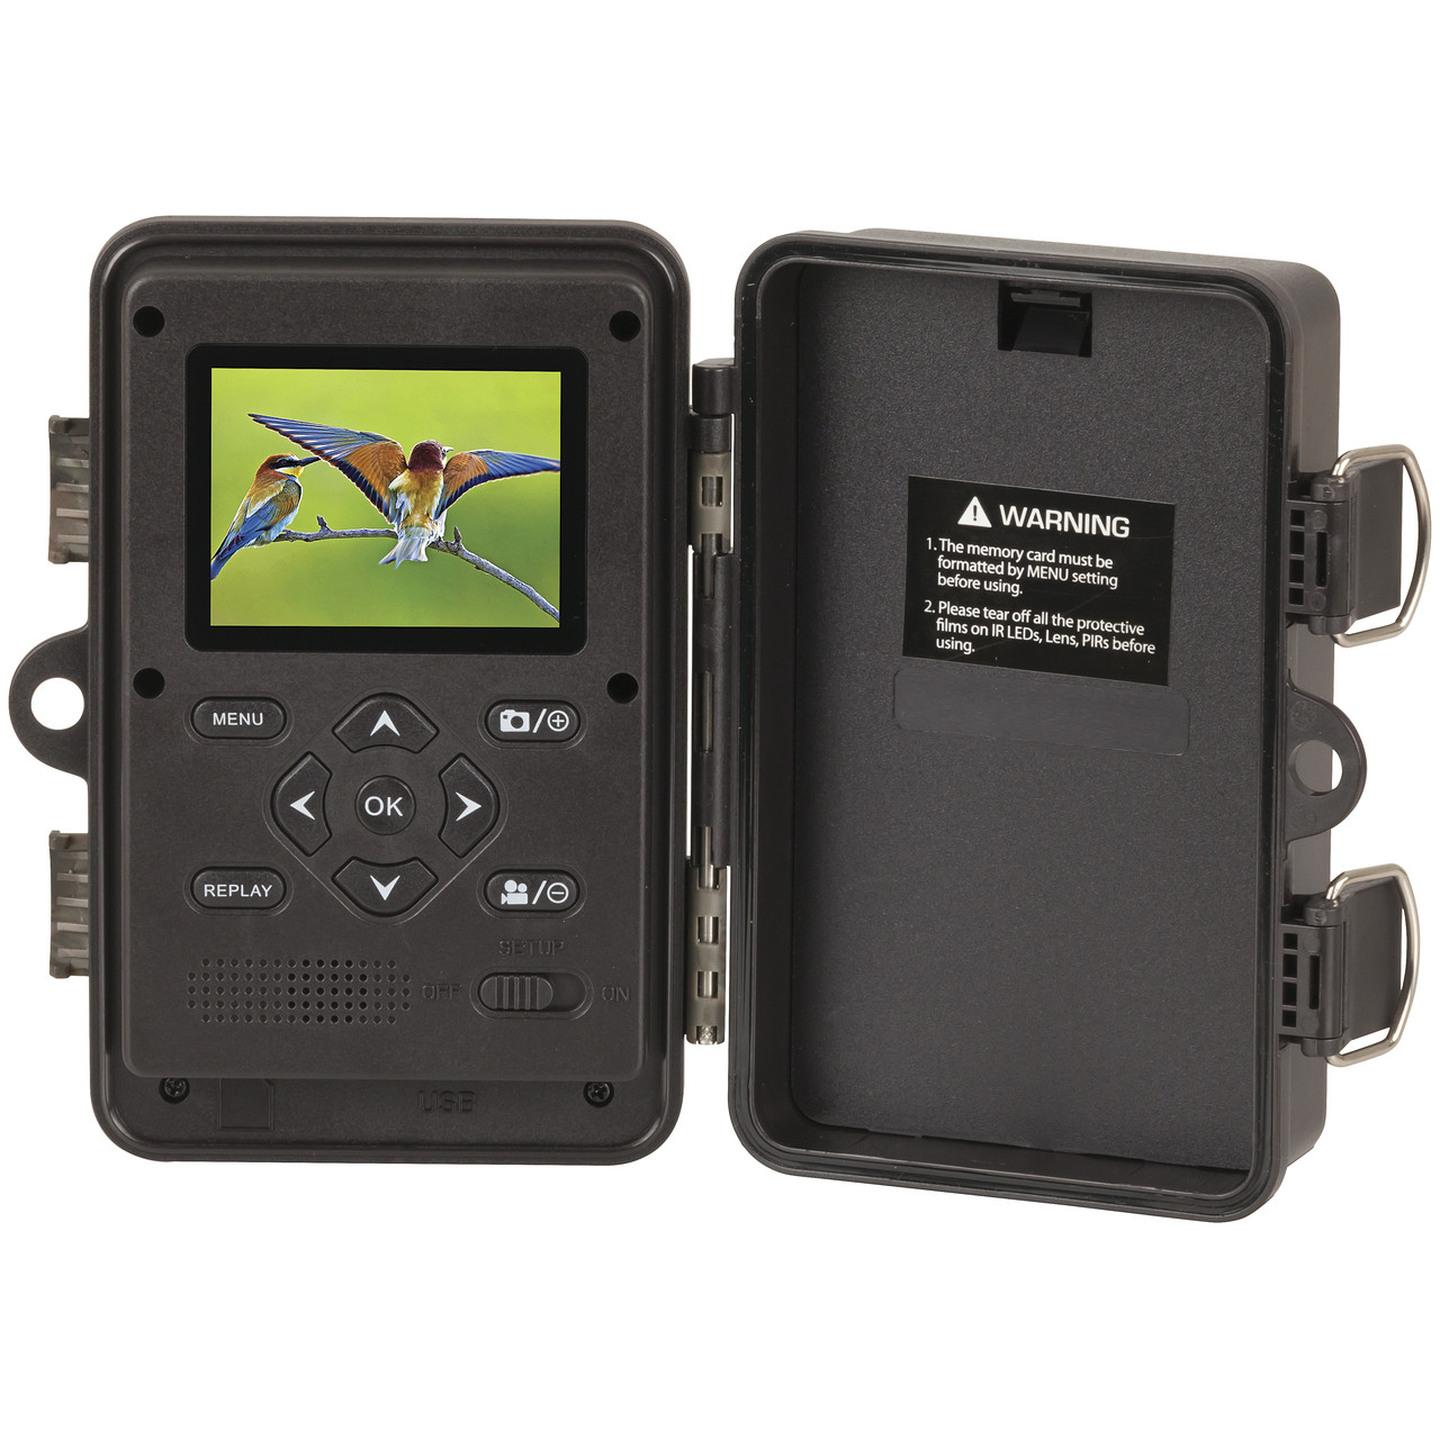 1080p Outdoor Trail Camera